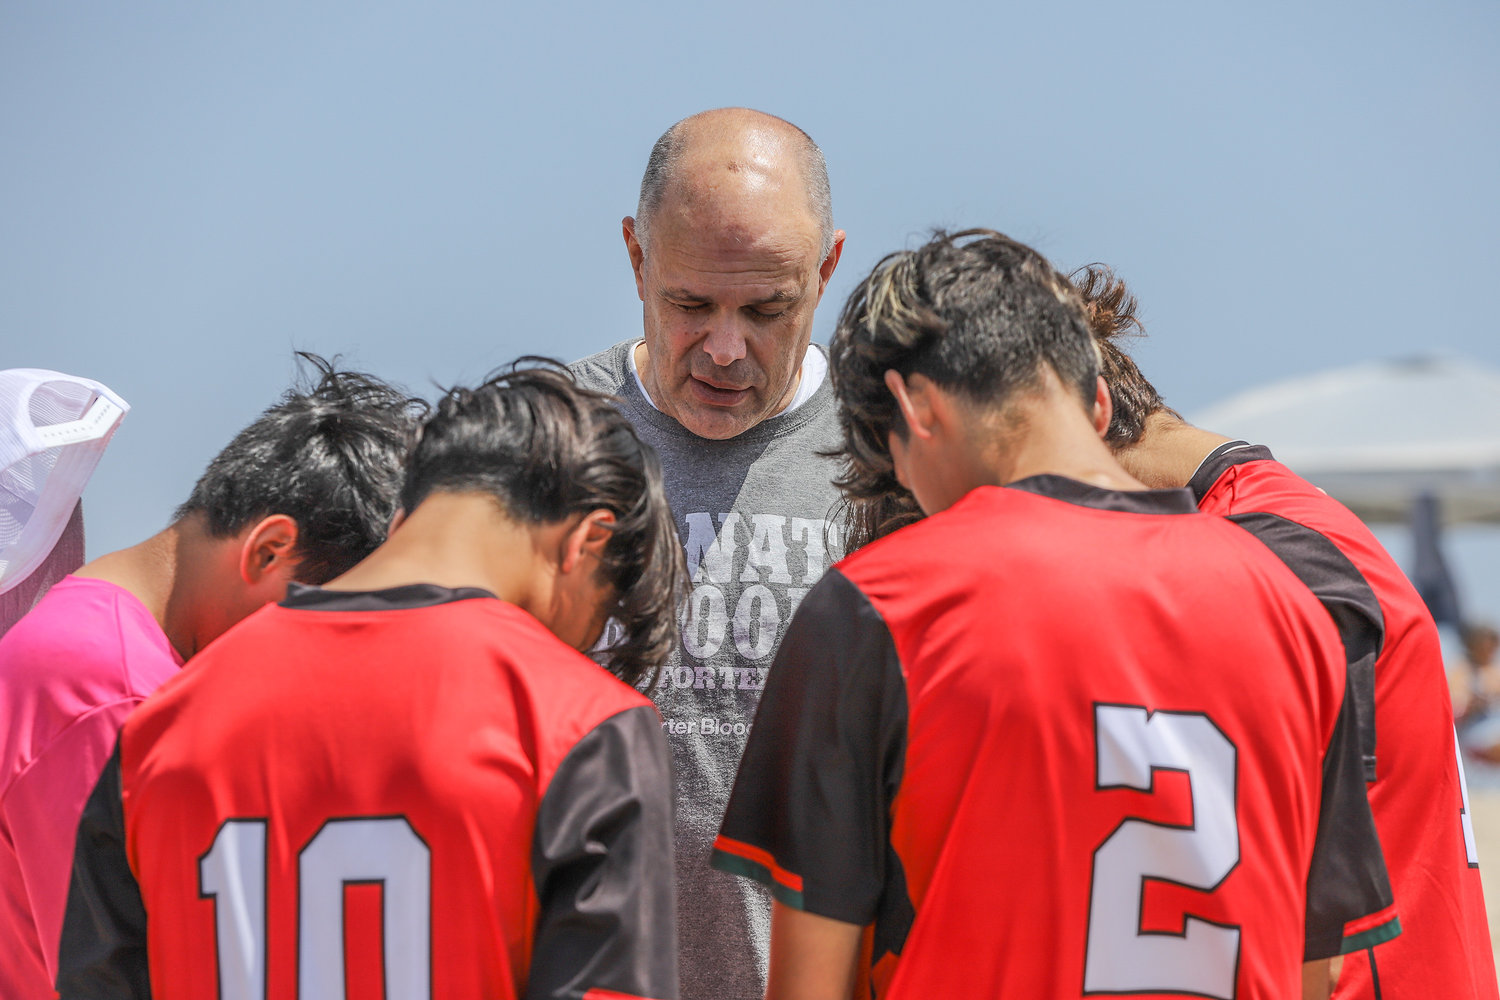 Pastor David Rose, center, of First Baptist Church of Winnsboro, Texas, prays with members of the Desert United Soccer Club at Huntington State Beach Park in Huntington Beach, Calif., June 11, 2022. The Garage Church in Huntington Beach sponsored a surf camp as part of Crossover Anaheim – an evangelistic outreach across the greater Los Angeles area prior to the Southern Baptist Convention annual meeting. (NAMB/Sonya Singh)